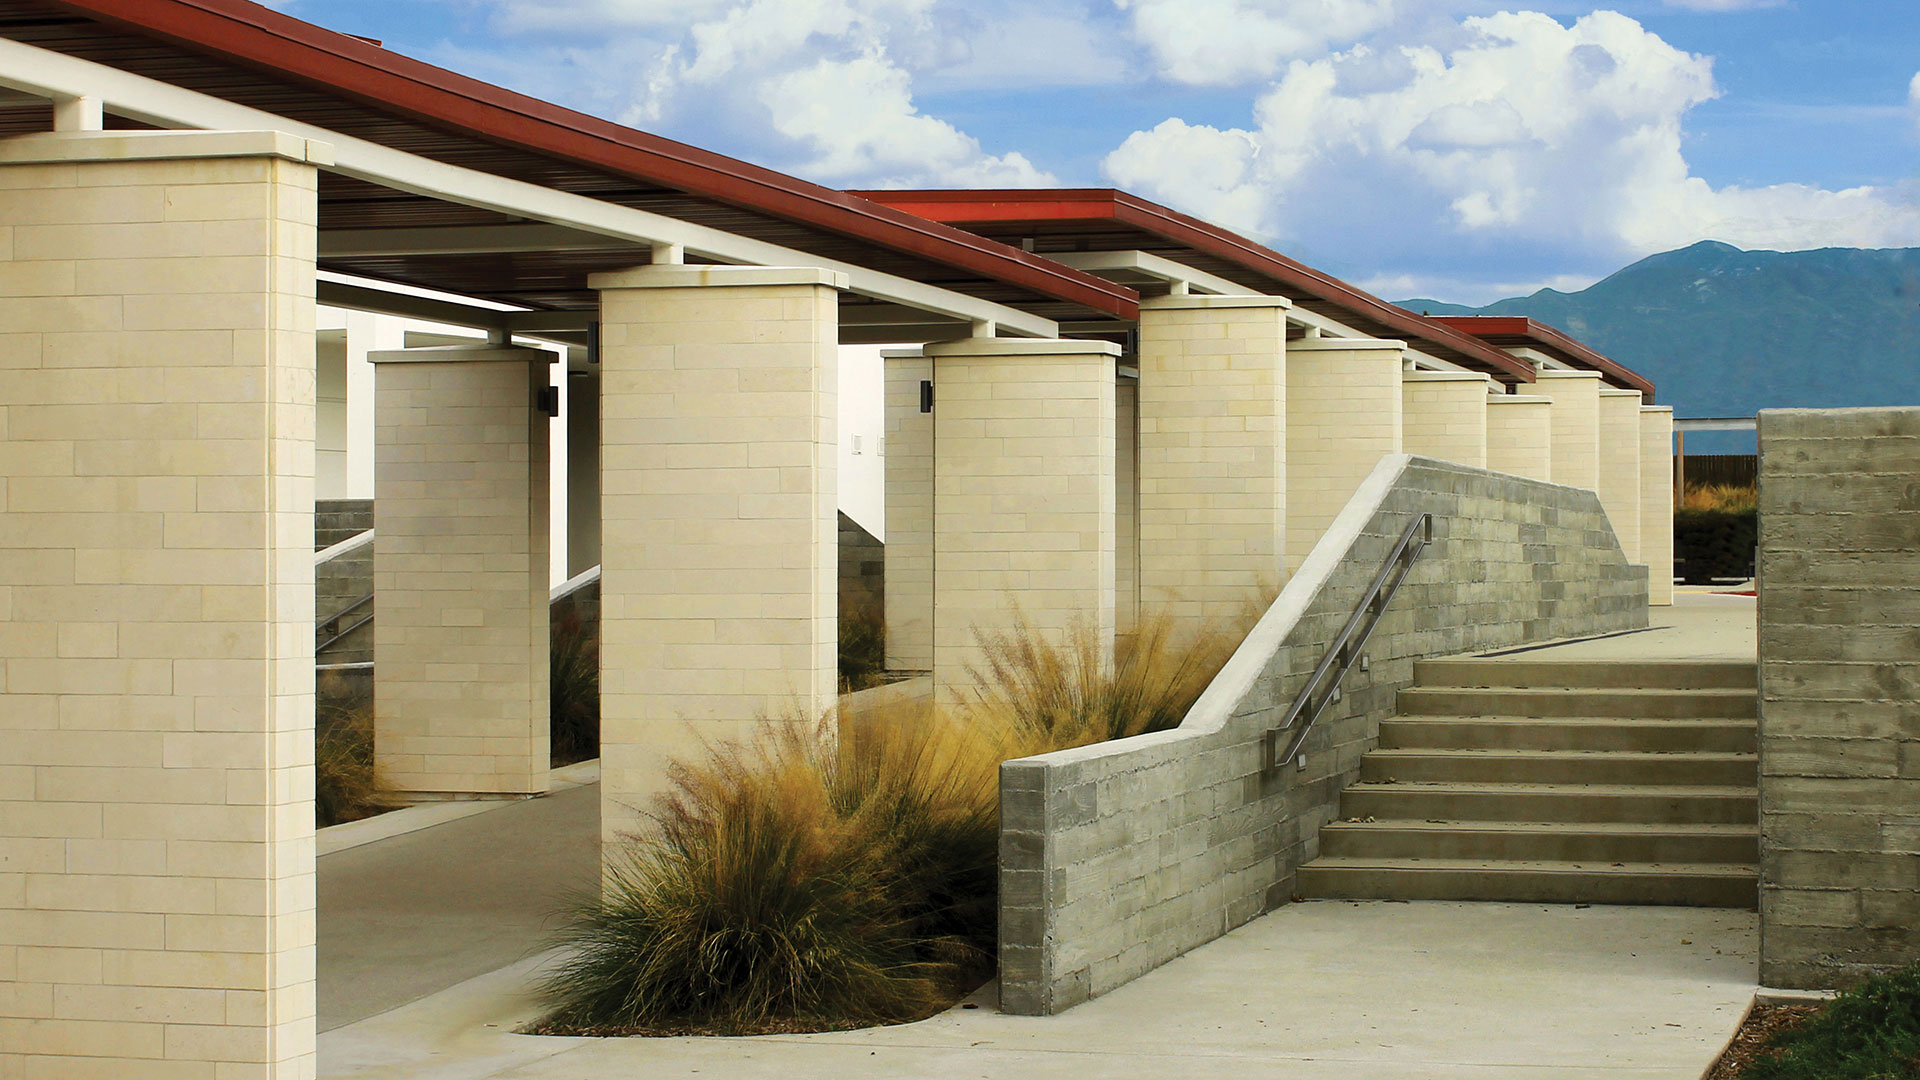 Stella Neo Planks natural stone thin veneer installed on exterior walls and columns of school